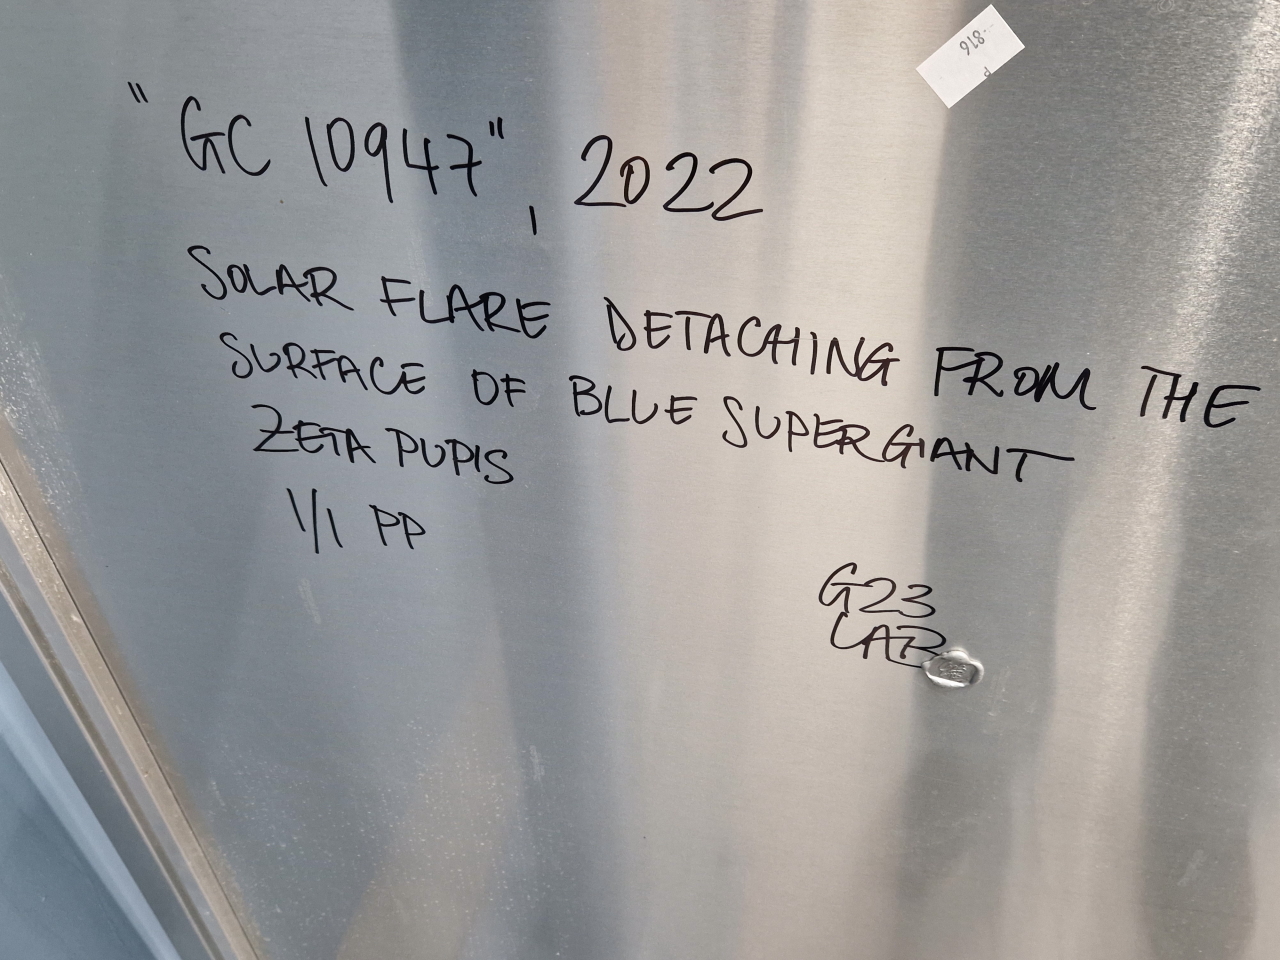 G23 LAB. (20TH CENTURY) ARR. "GC10947" (C.2022) SOLAR FLARE DETACHING FROM THE SURFACE OF BLUE SUPER - Image 6 of 6